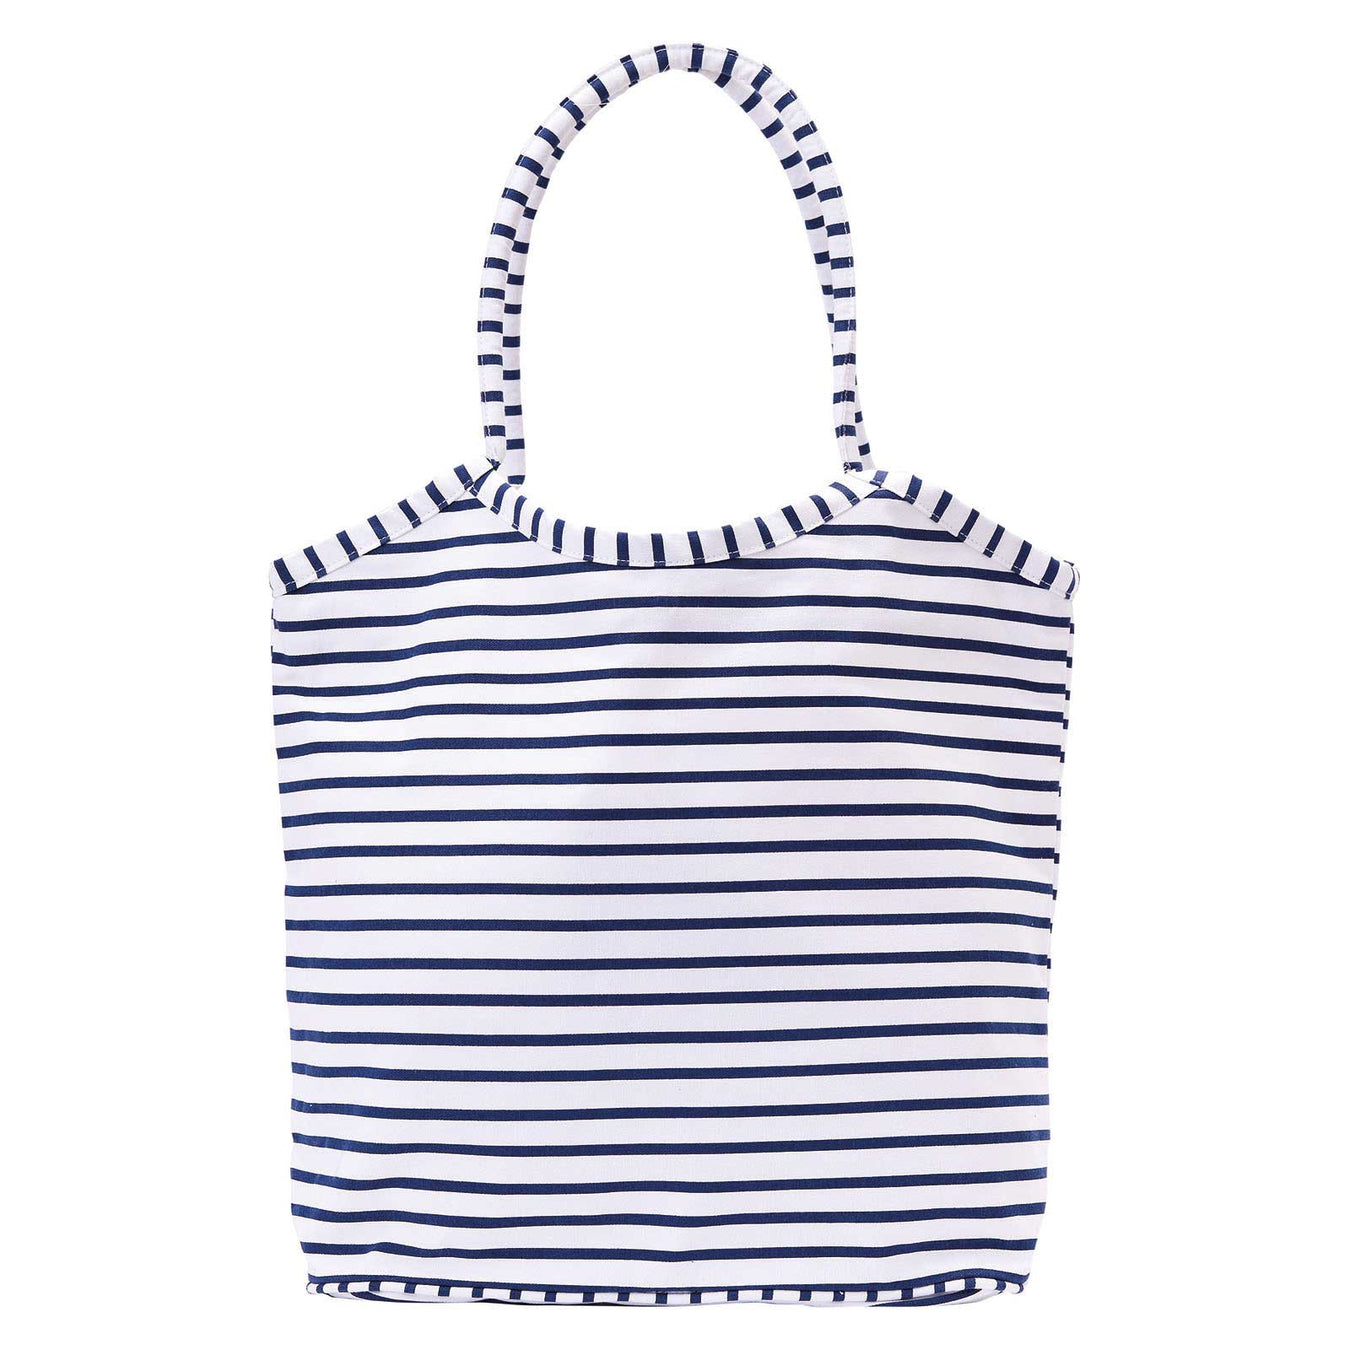 Totes, Carryalls, and Pouches